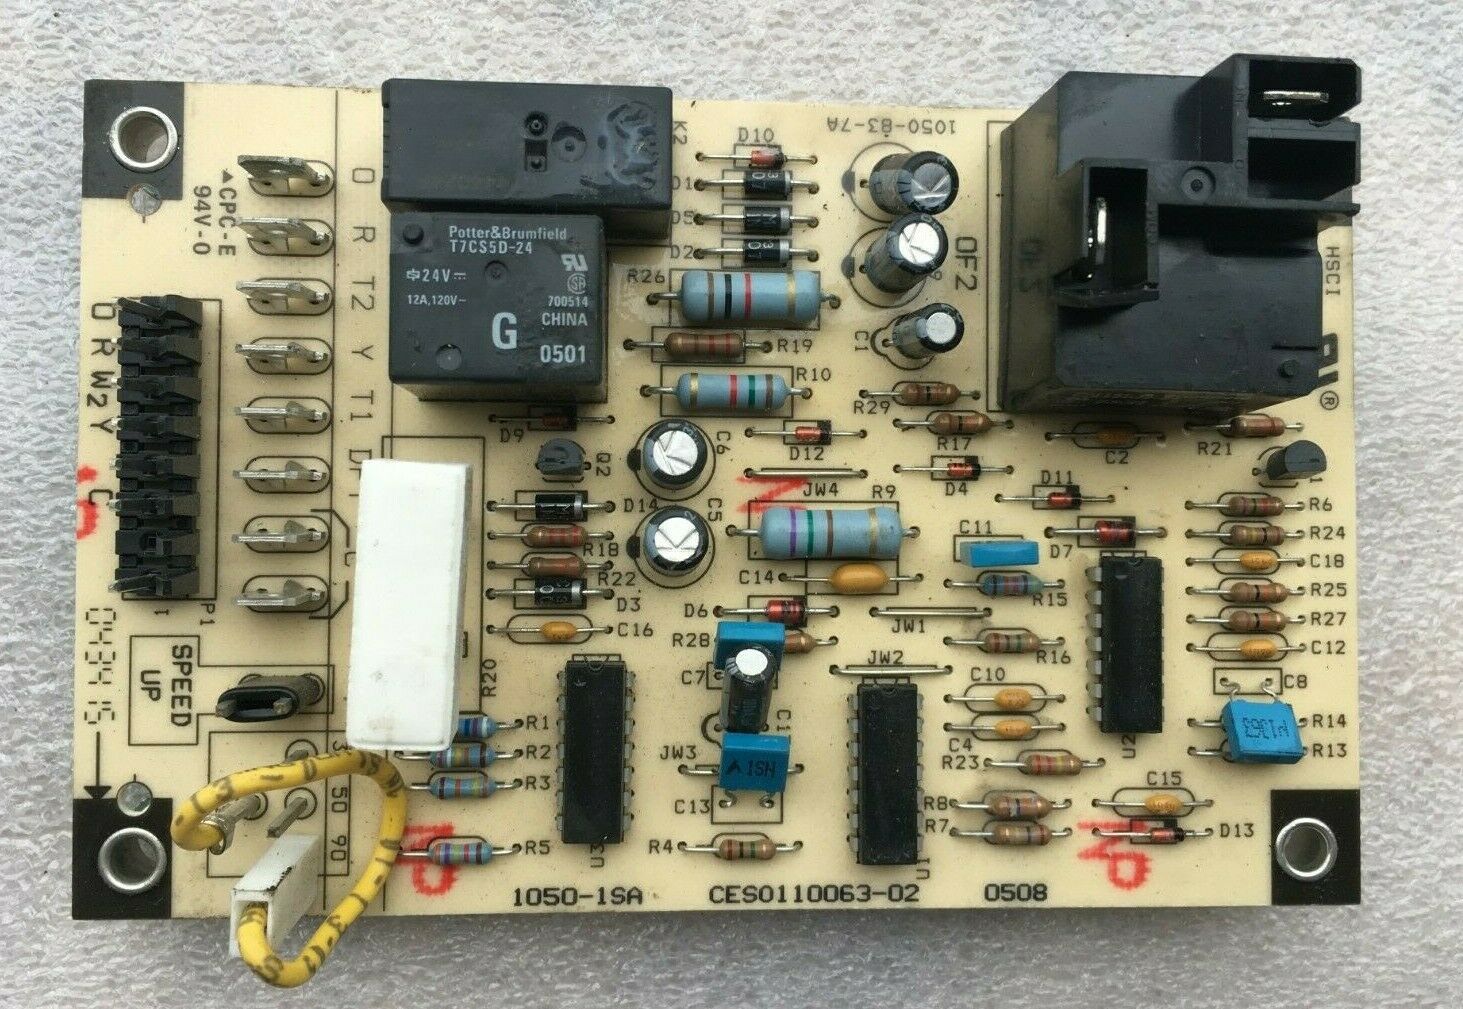 Carrier Bryant CESO110063-02 Defrost Control Circuit Board CES0110063-02 1050-1 